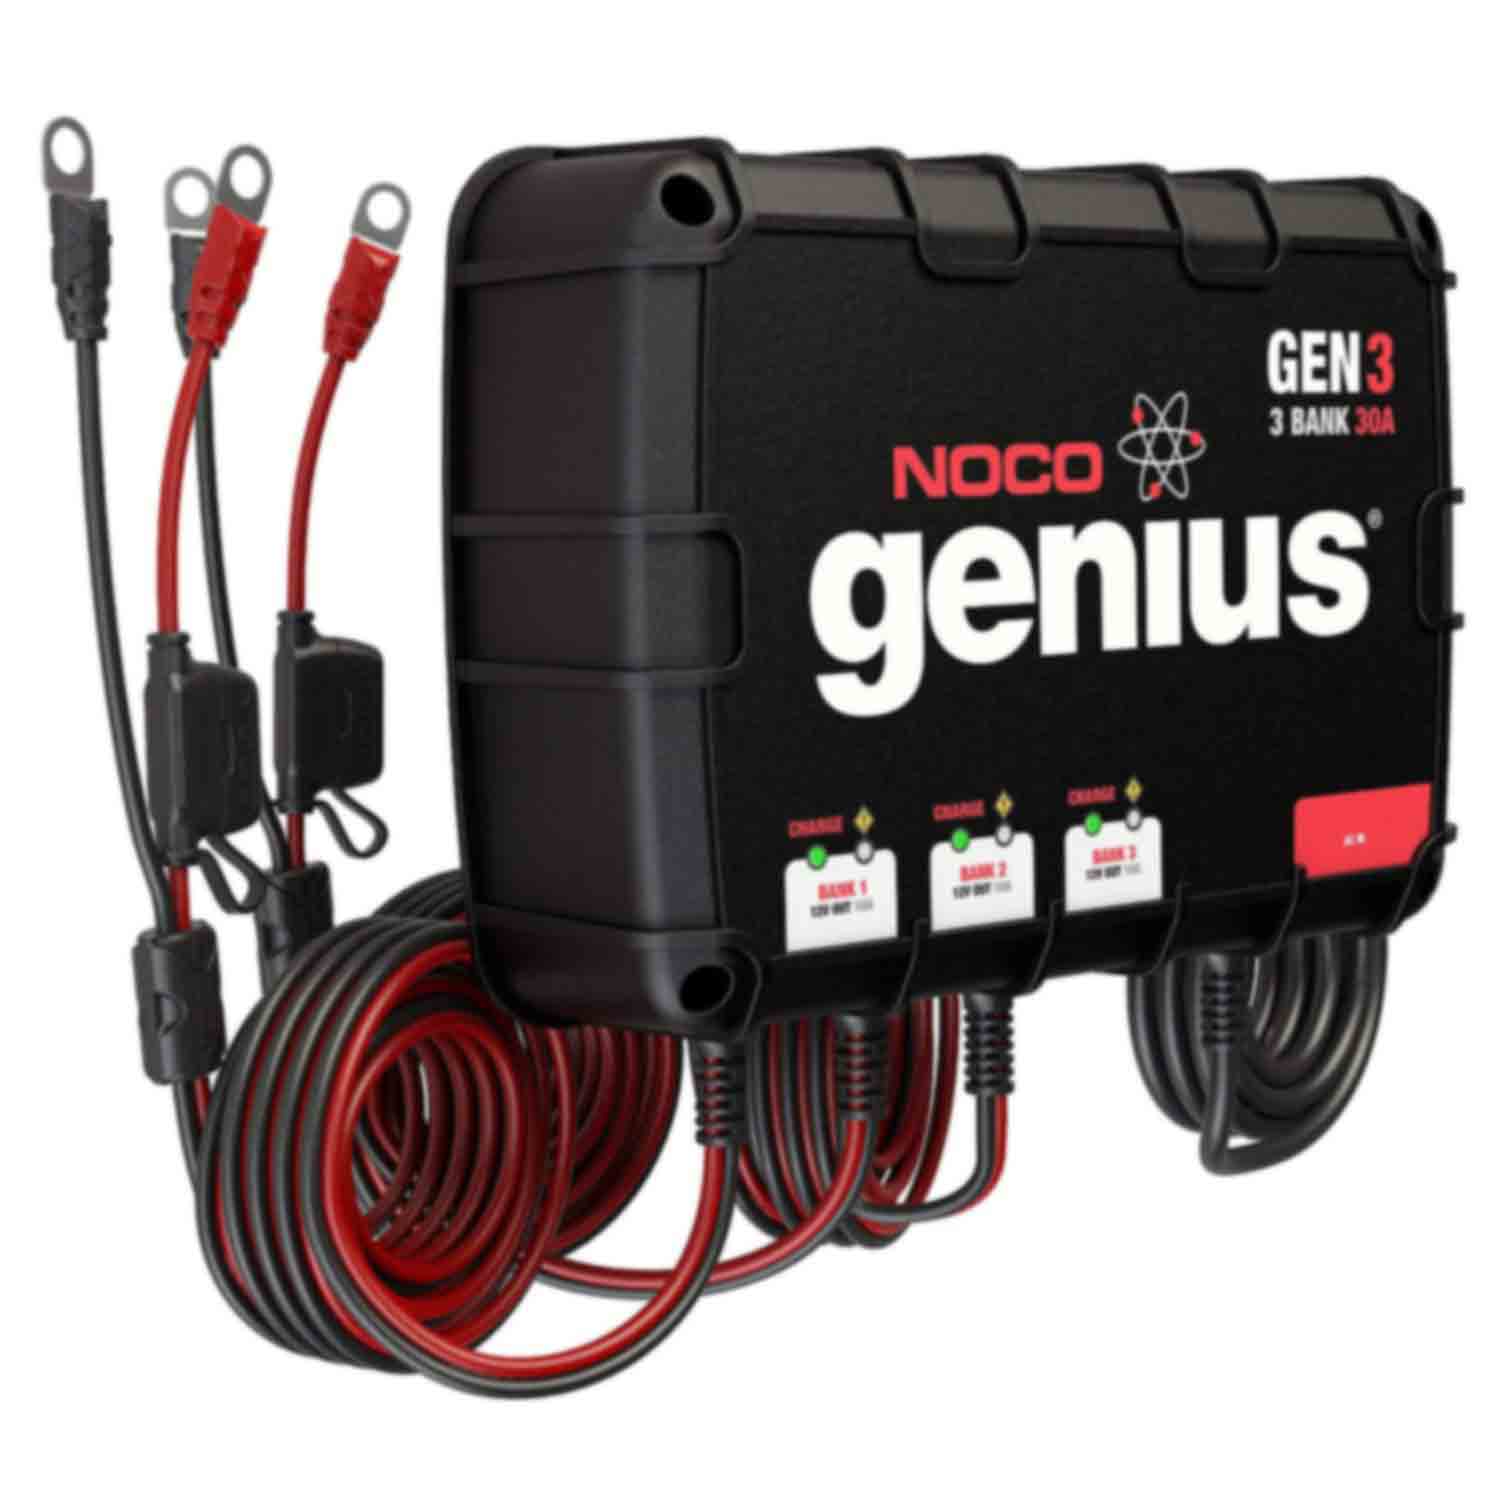 NOCO Genius GEN3 30 Amp 3-Bank On-Board Battery Charger